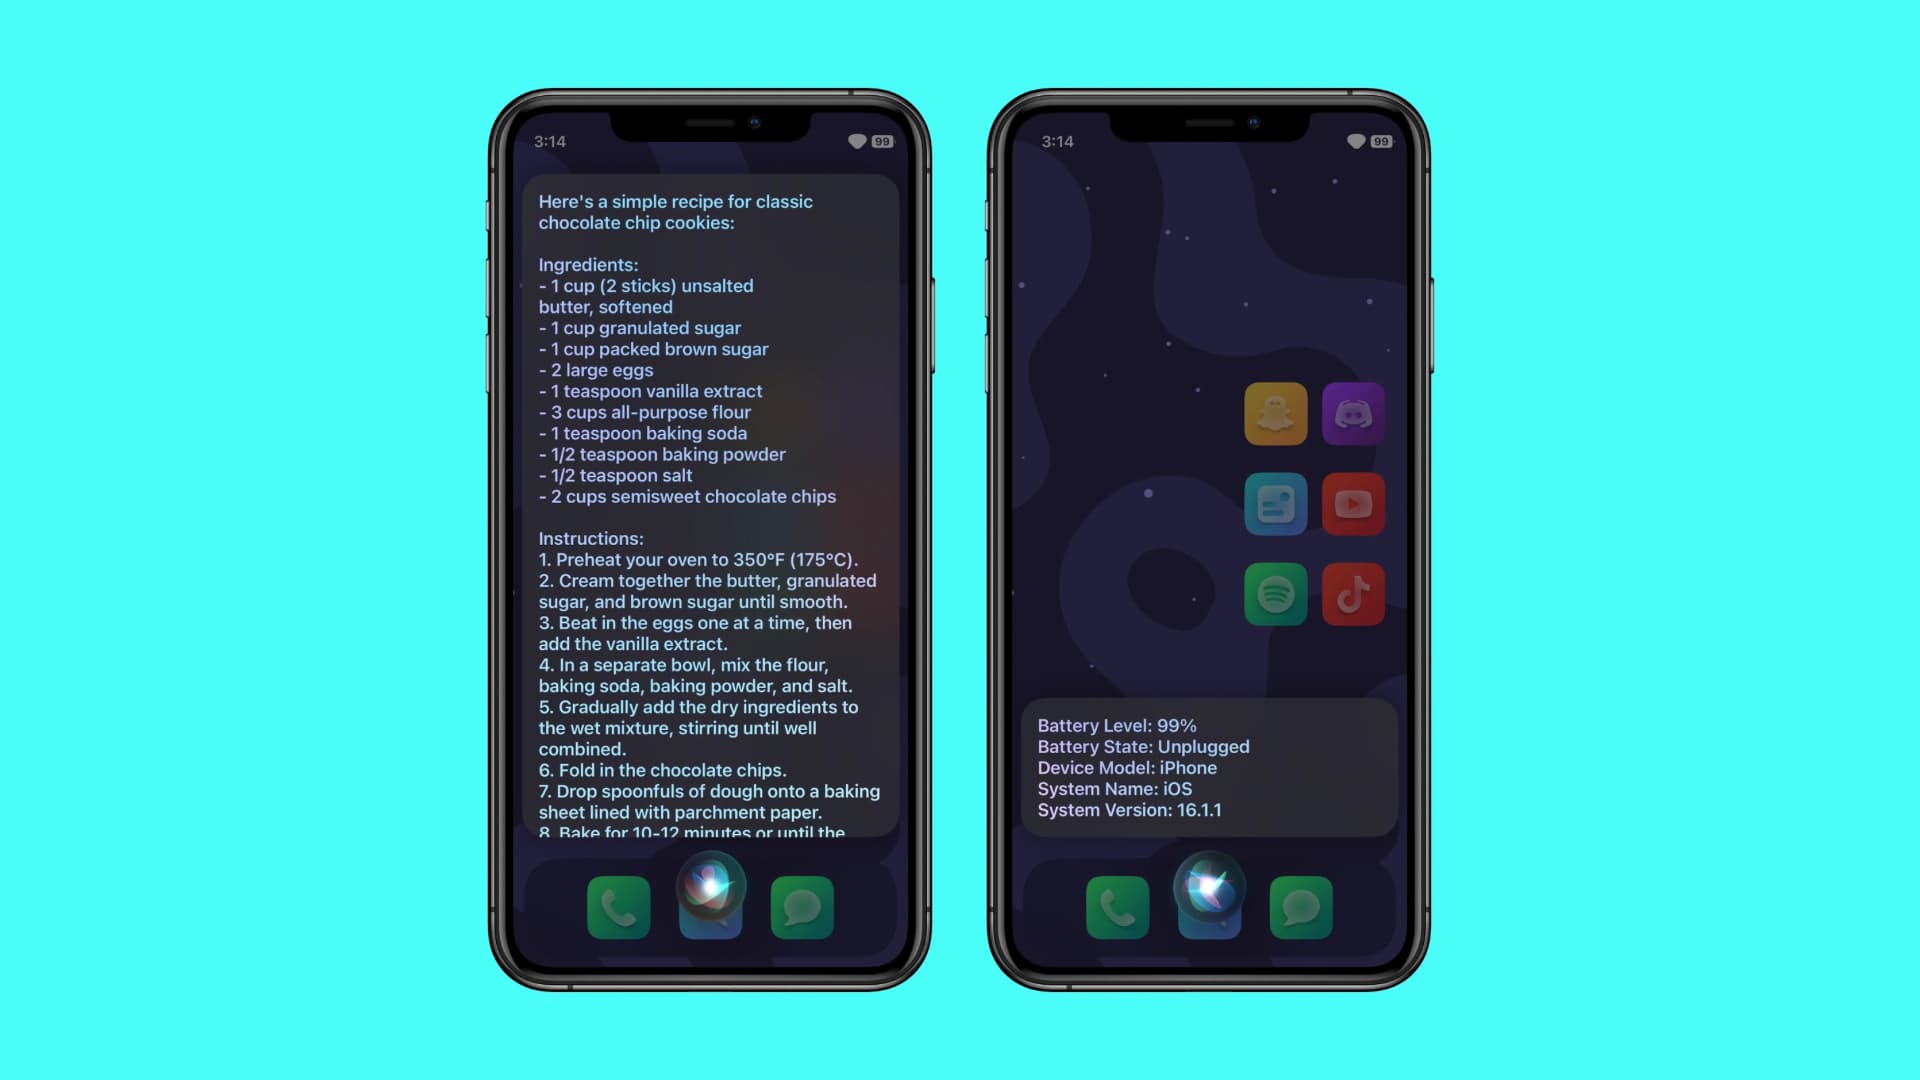 SiriPlus replaces braindead Siri iOS assistant with either ChatGPT or Gemini AI